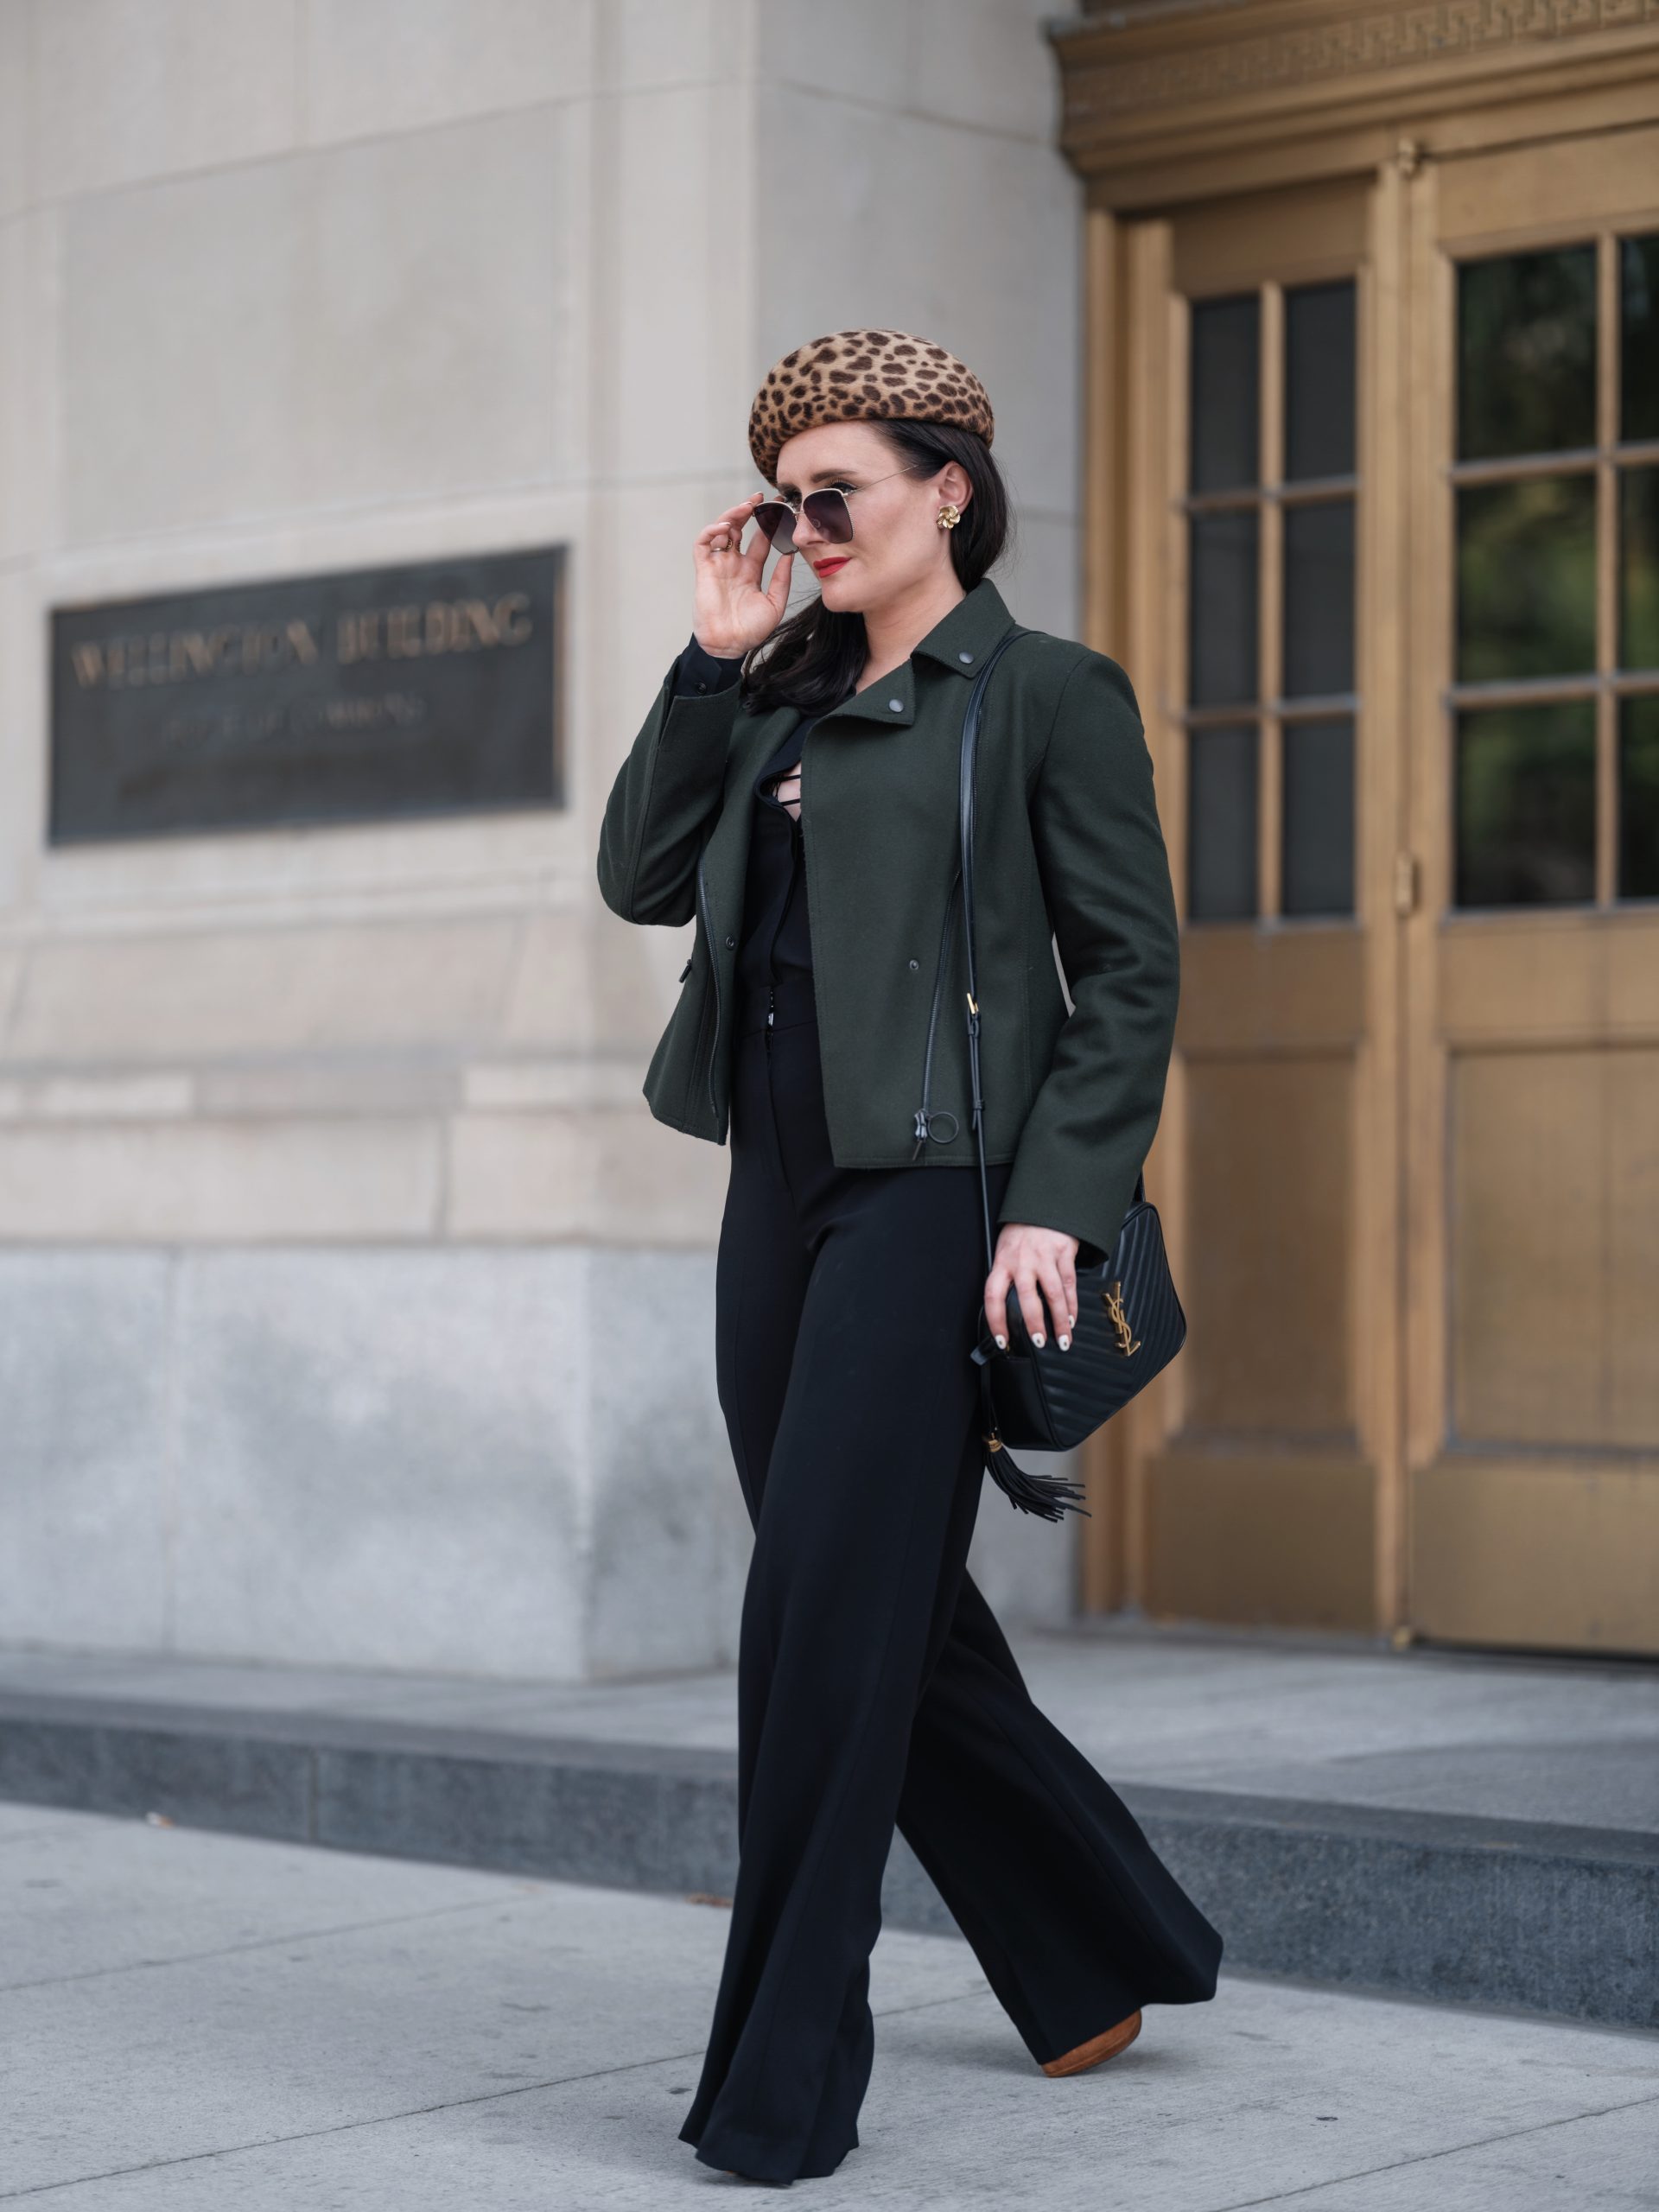 Fall Fashion 2021: Military-Inspired Style | Taste and Tipple